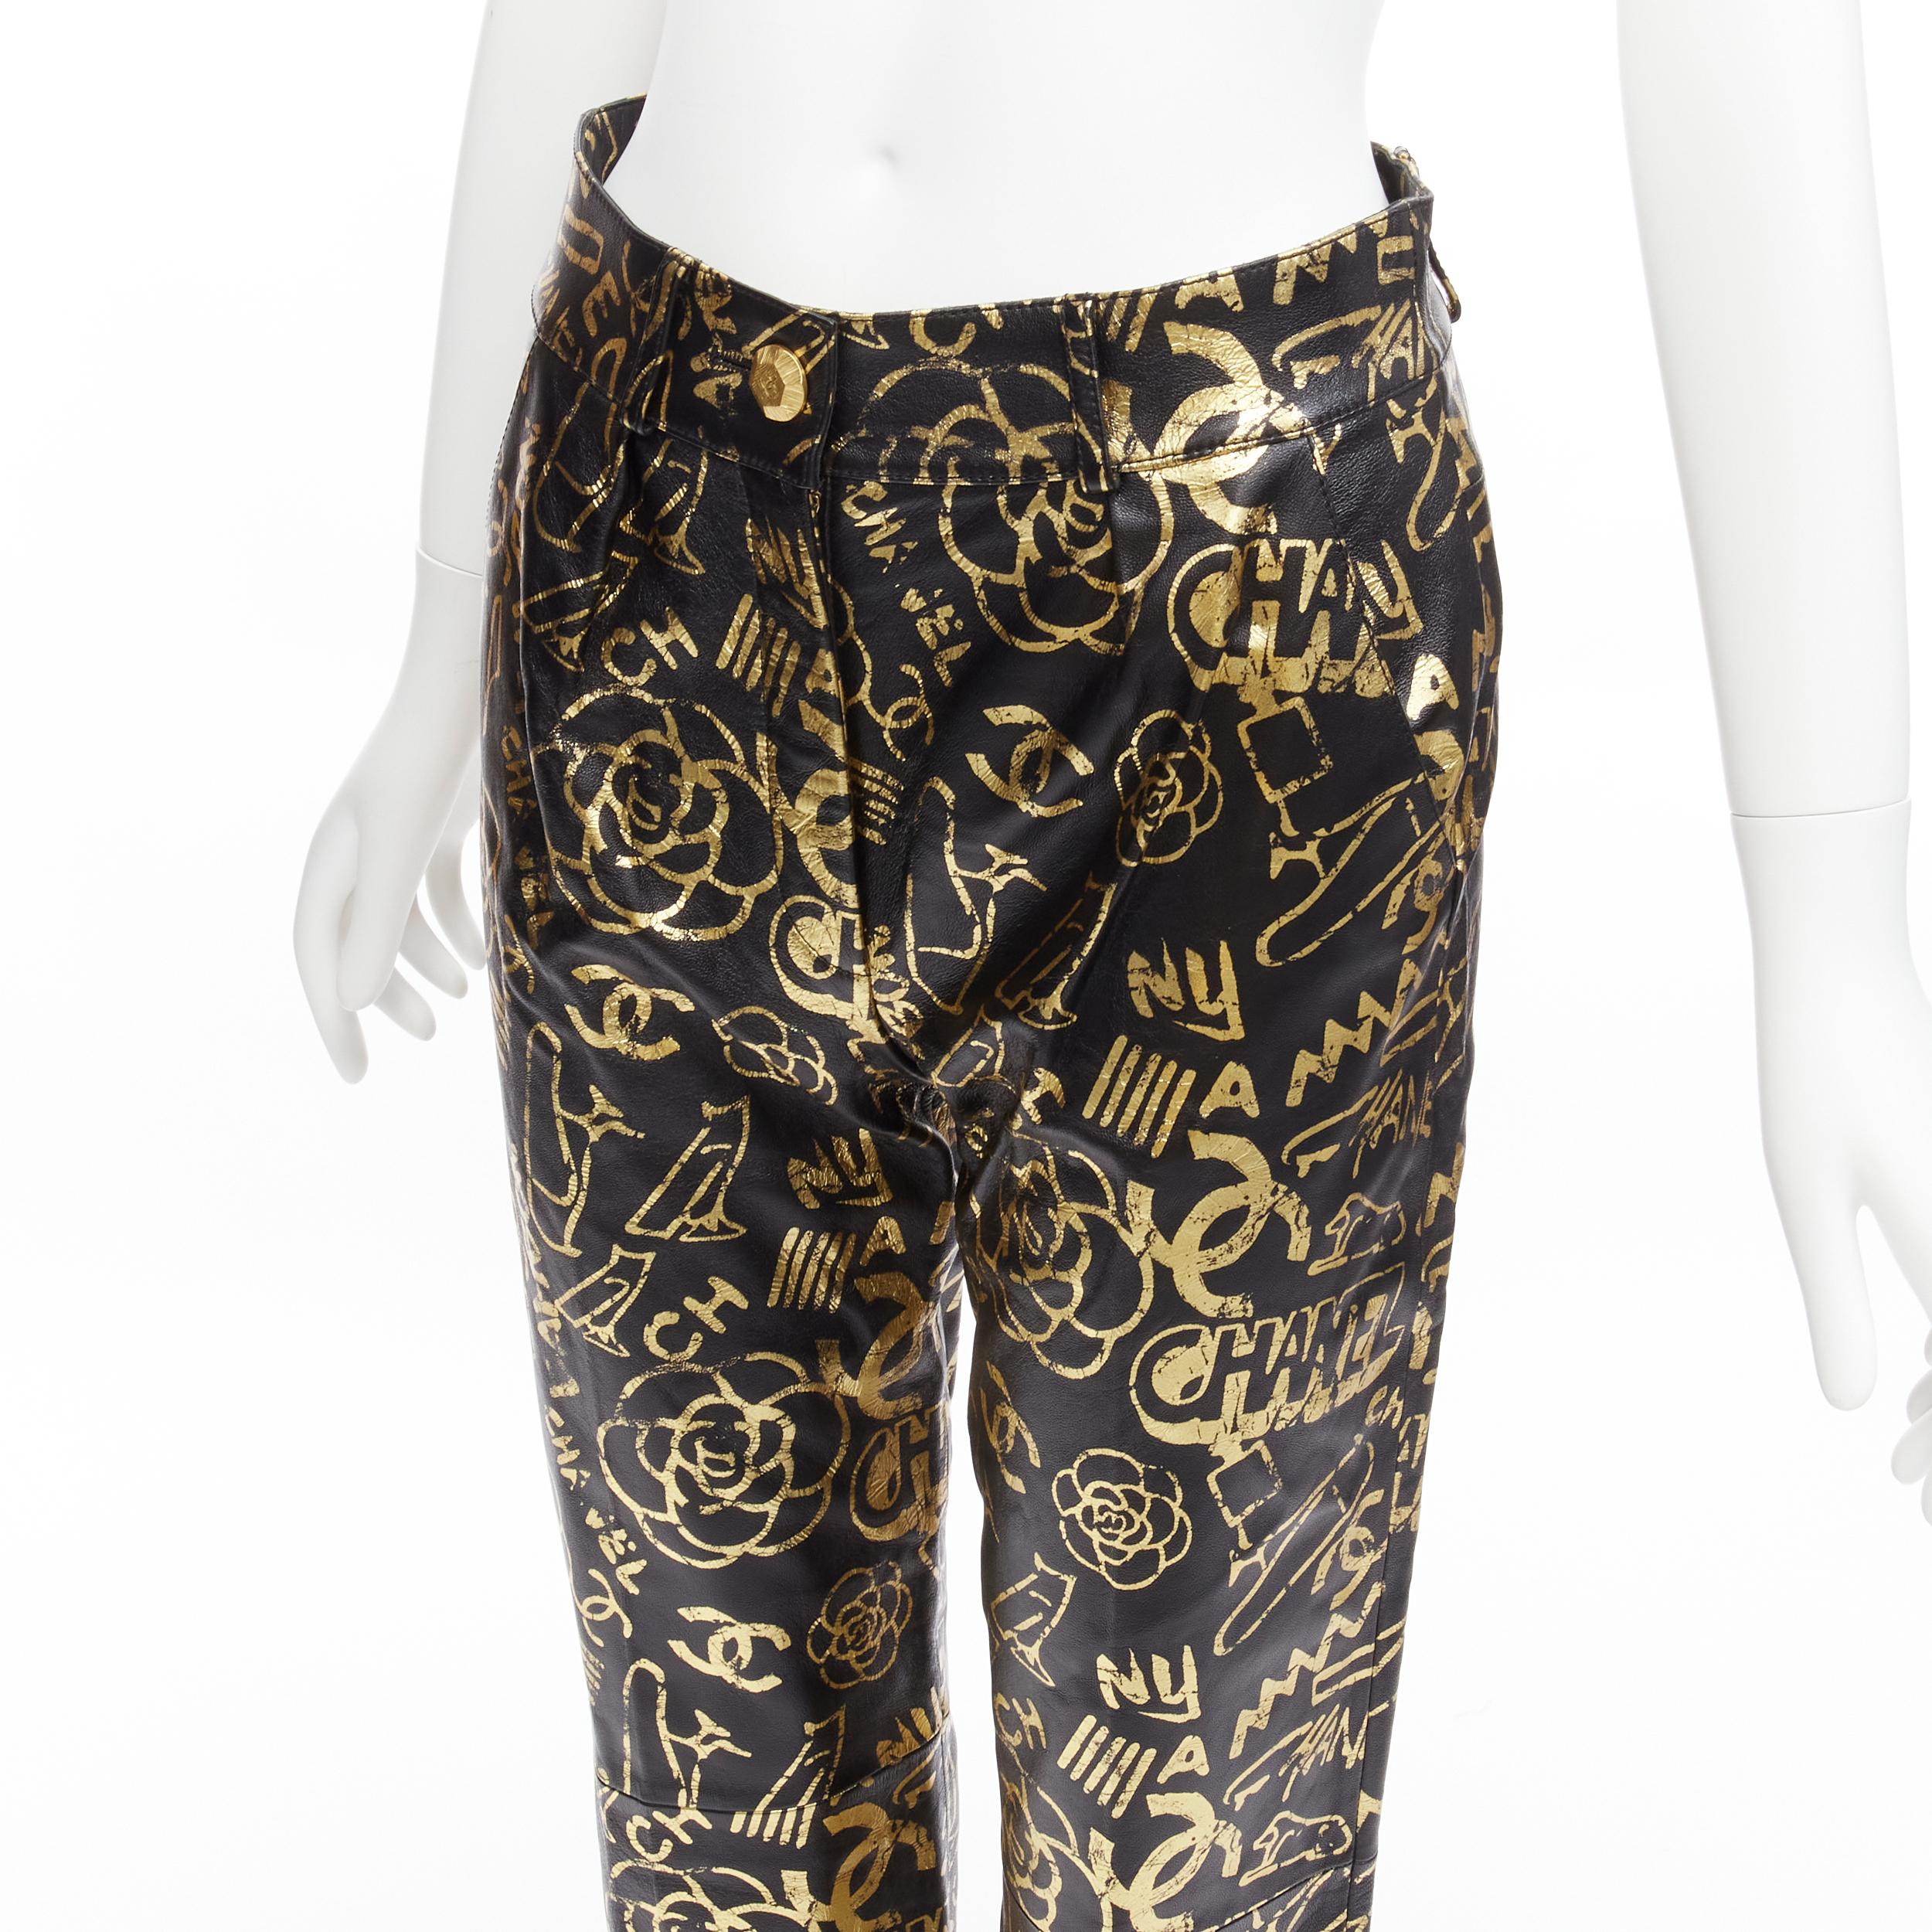 new CHANEL 19A gold CC Camellia graffiti print black lambskin leather pants FR34 XS
Reference: TGAS/D00295
Brand: Chanel
Designer: Karl Lagerfeld
Collection: 19A - Runway
Material: Lambskin Leather
Color: Black, Gold
Pattern: Abstract
Closure: Zip